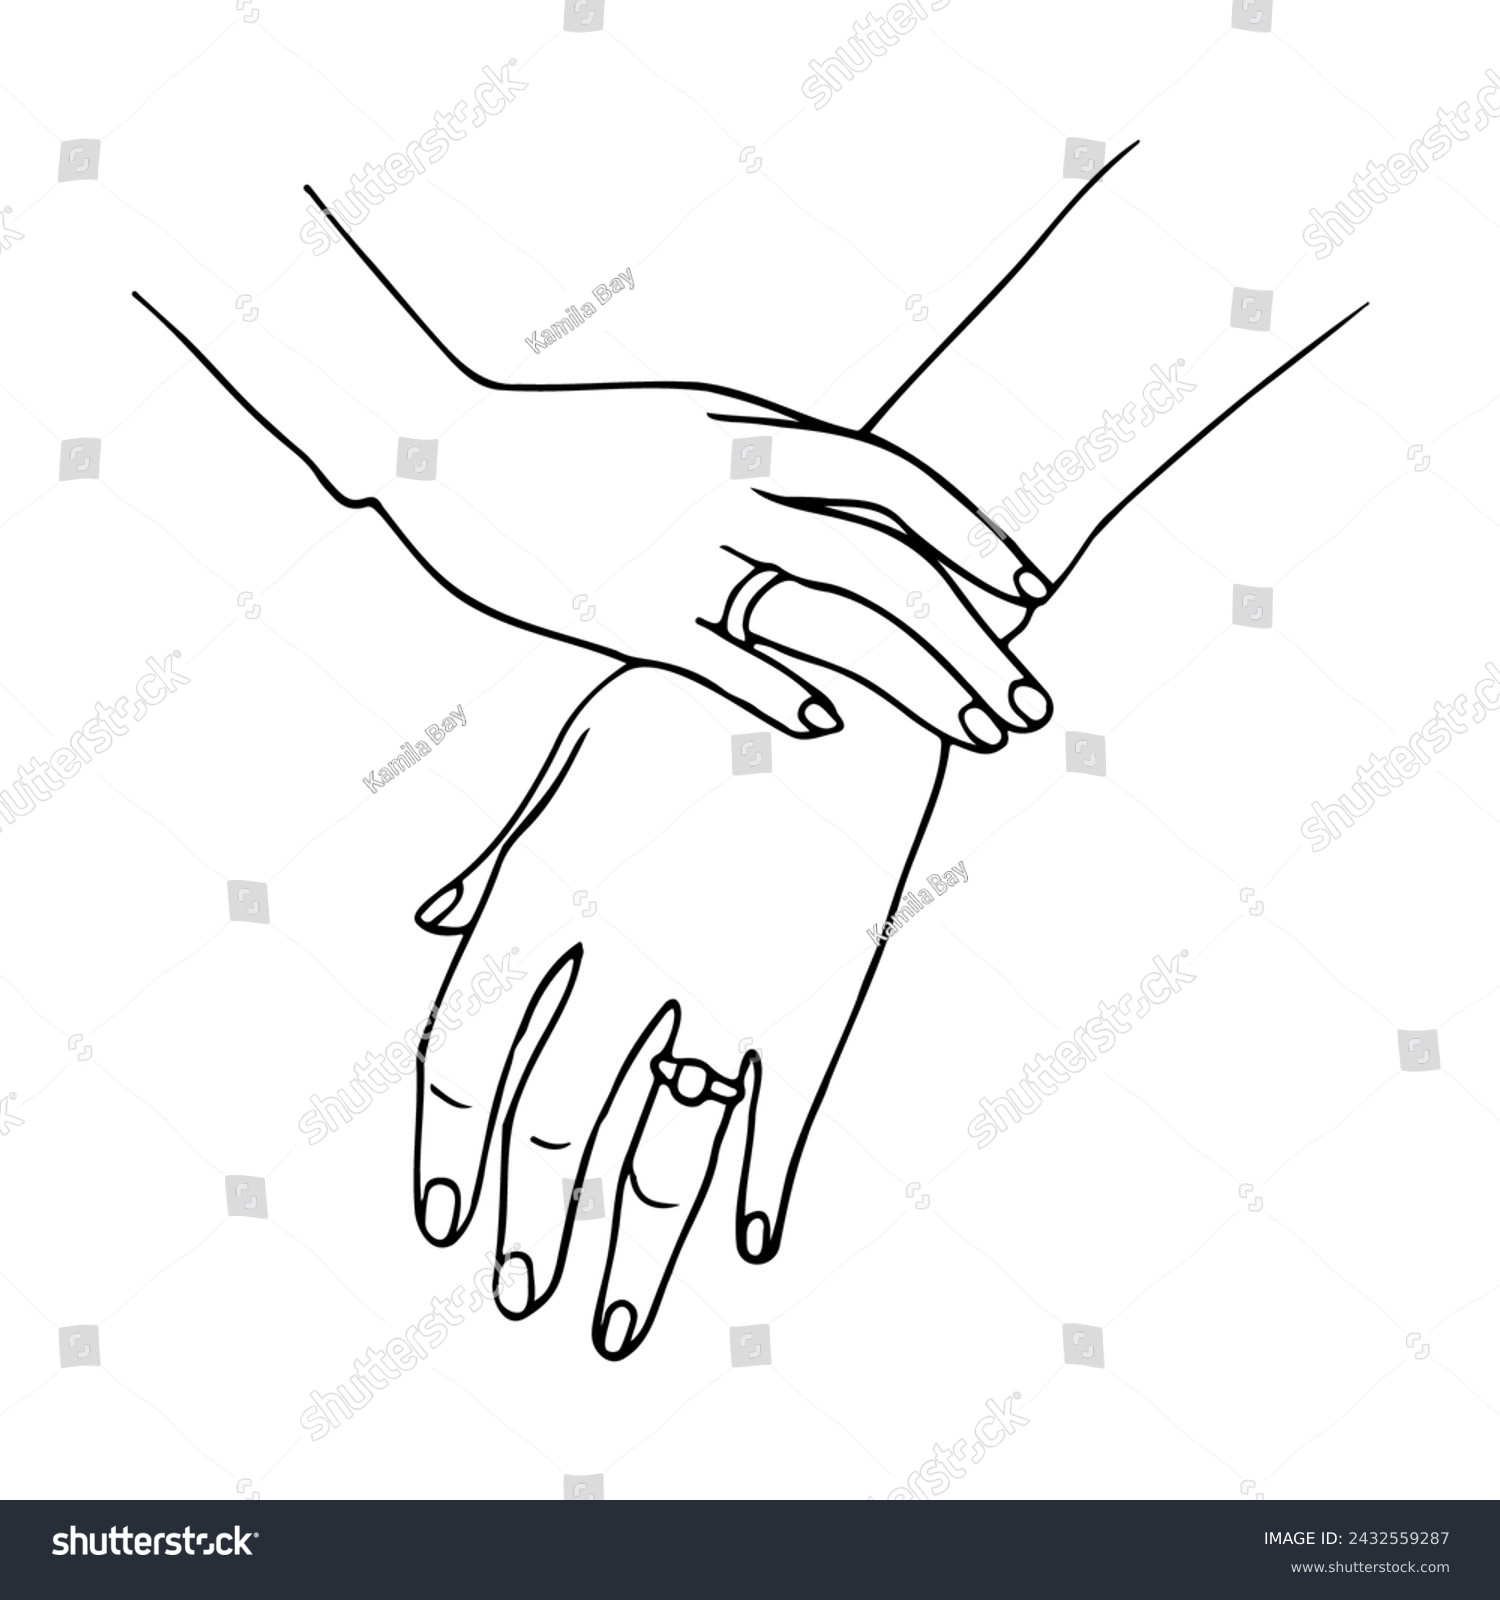 SVG of women's graceful hands with rings on the ring fingers. hands of the bride sketch svg